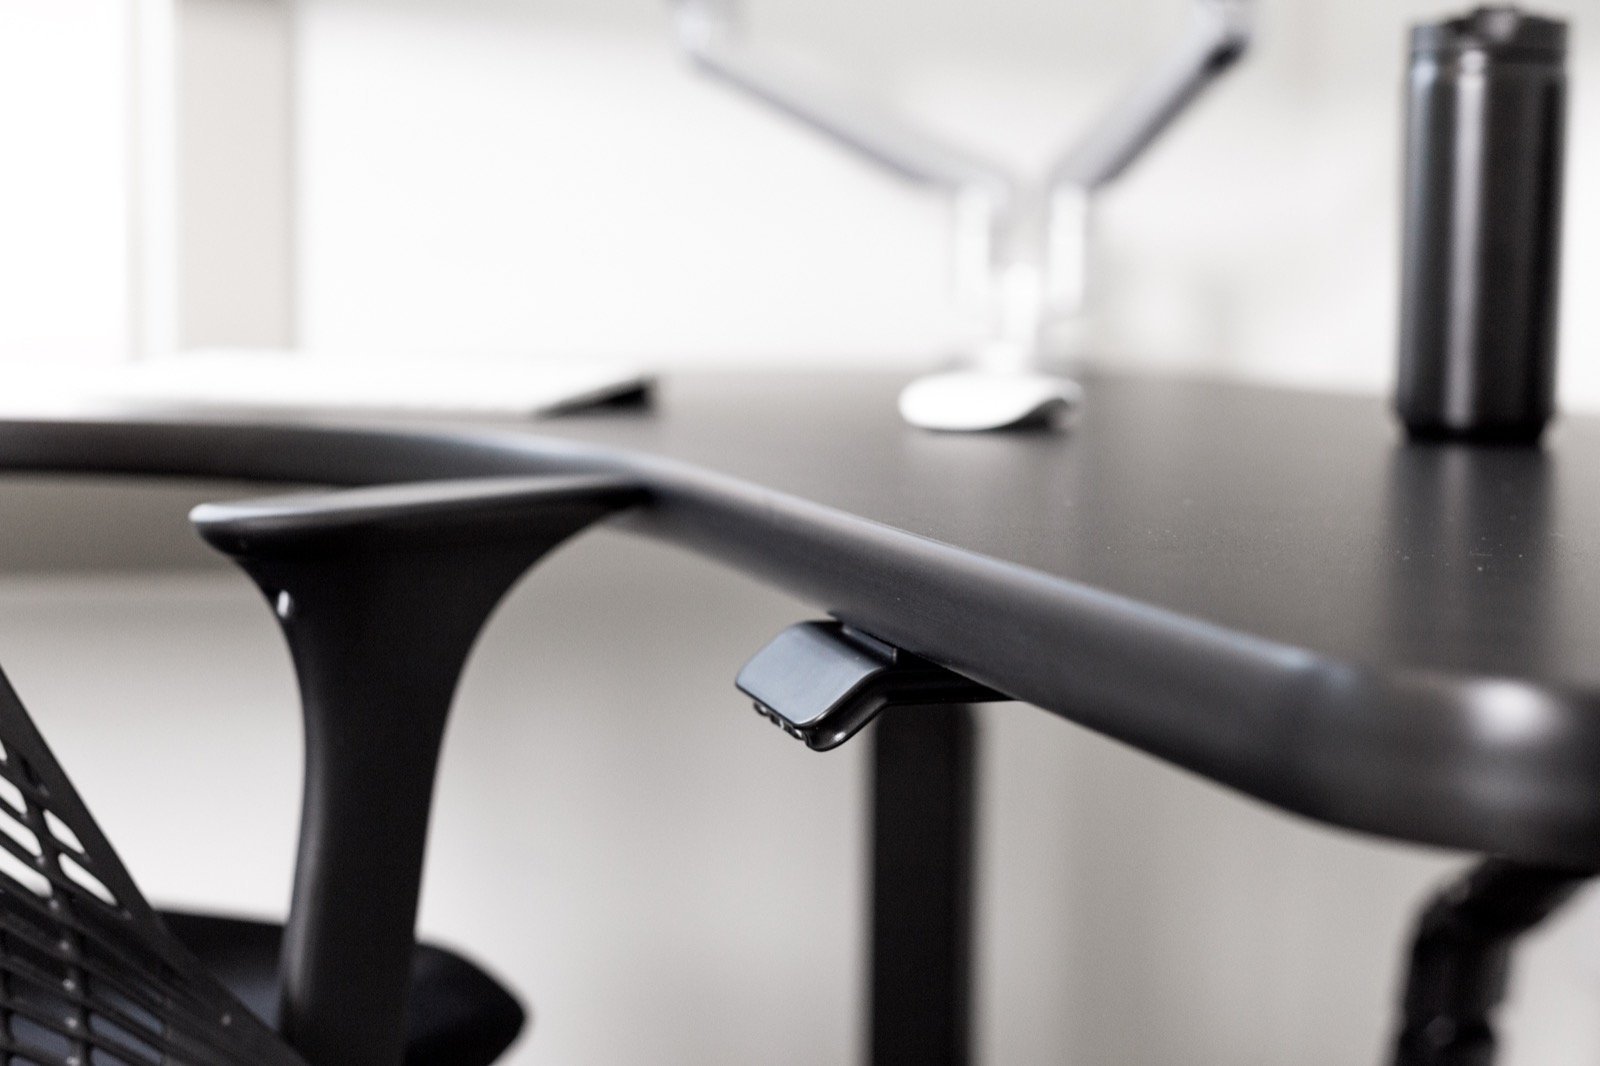 UPDESK’s Bluetooth Smart Desk Controller May Be More Powerful Than You Think